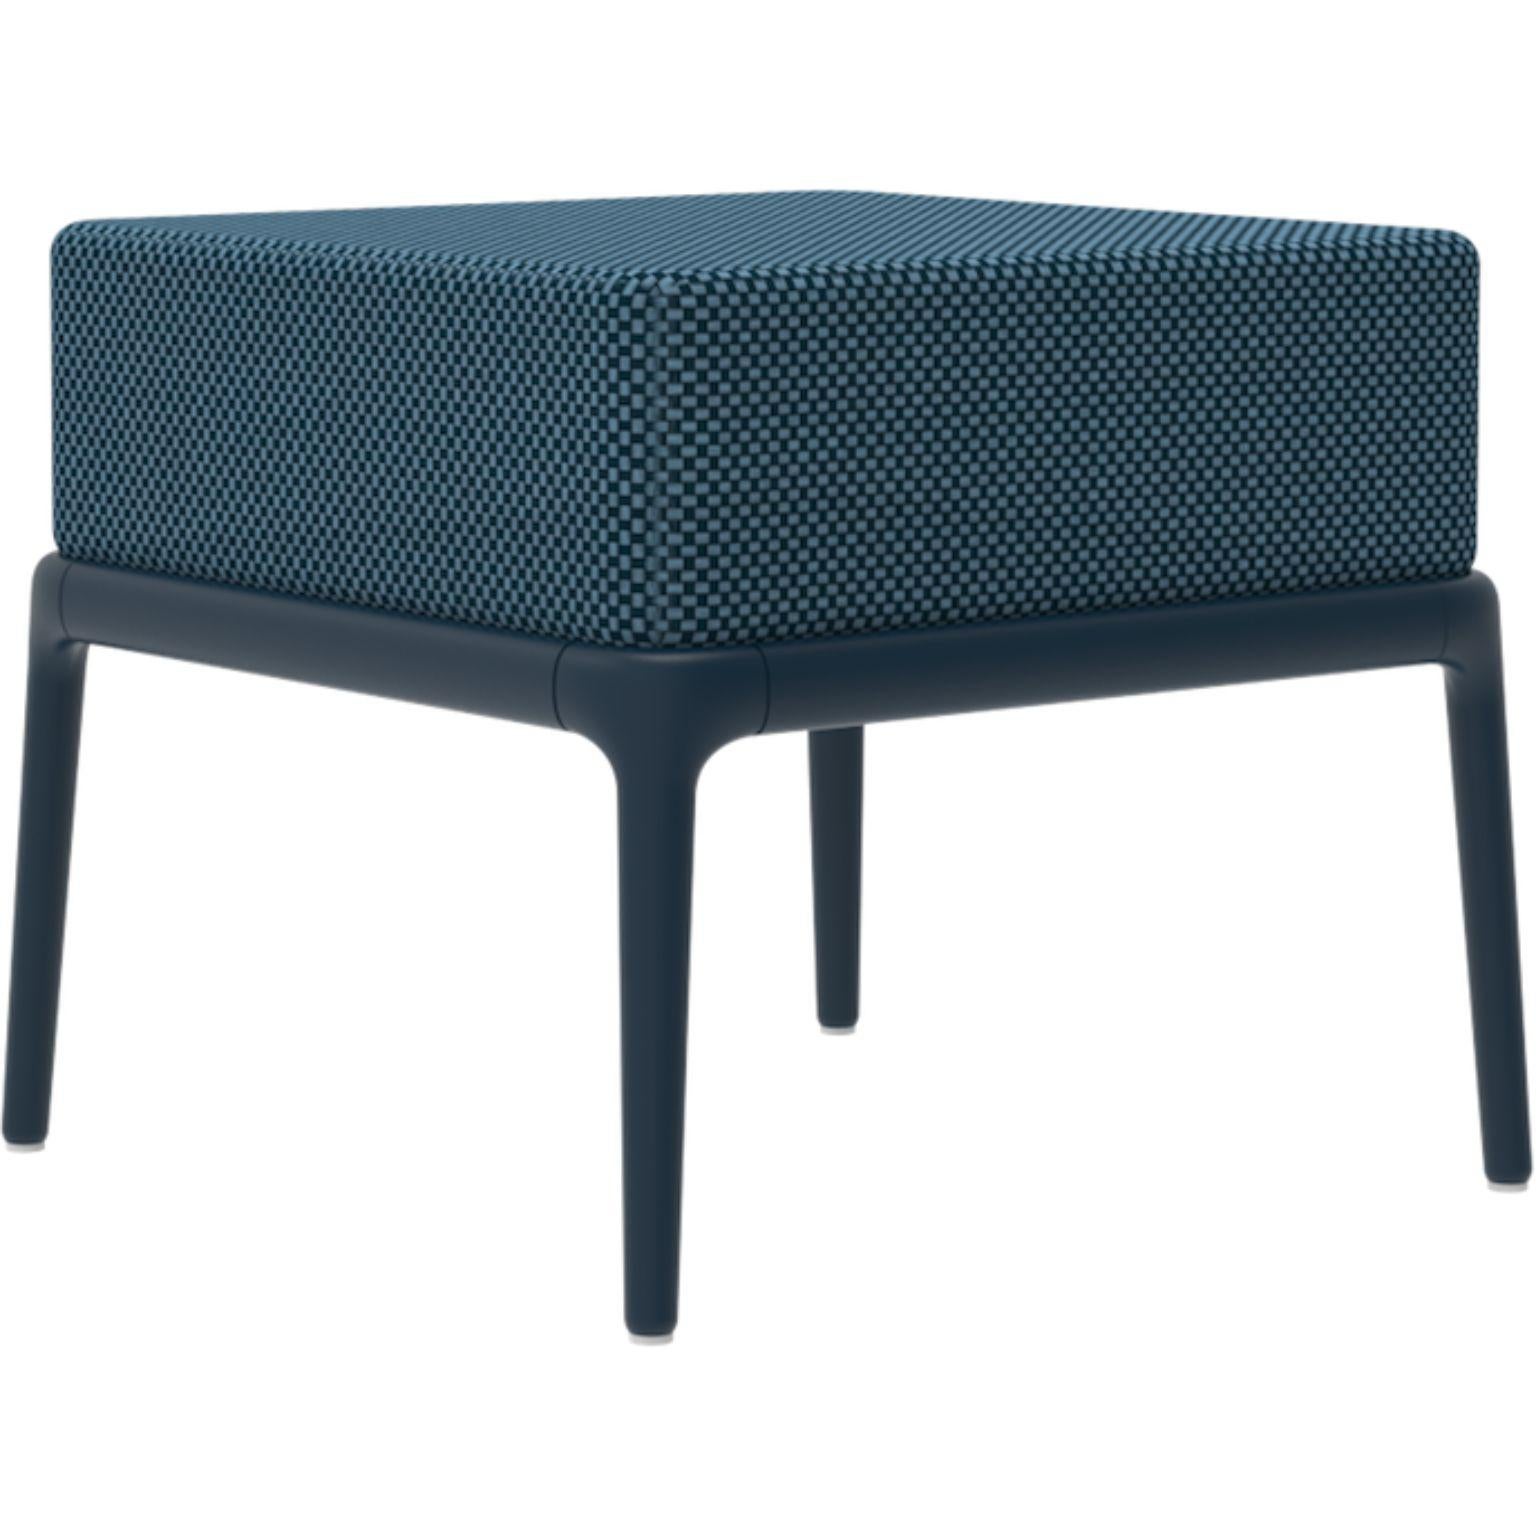 Xaloc navy pouf 50 by Mowee.
Dimensions: D50 x W50 x H43 cm
Material: Aluminium, Textile
Weight: 7 kg
Also Available in different colours and finishes.

 Xaloc synthesizes the lines of interior furniture to extrapolate to the exterior,